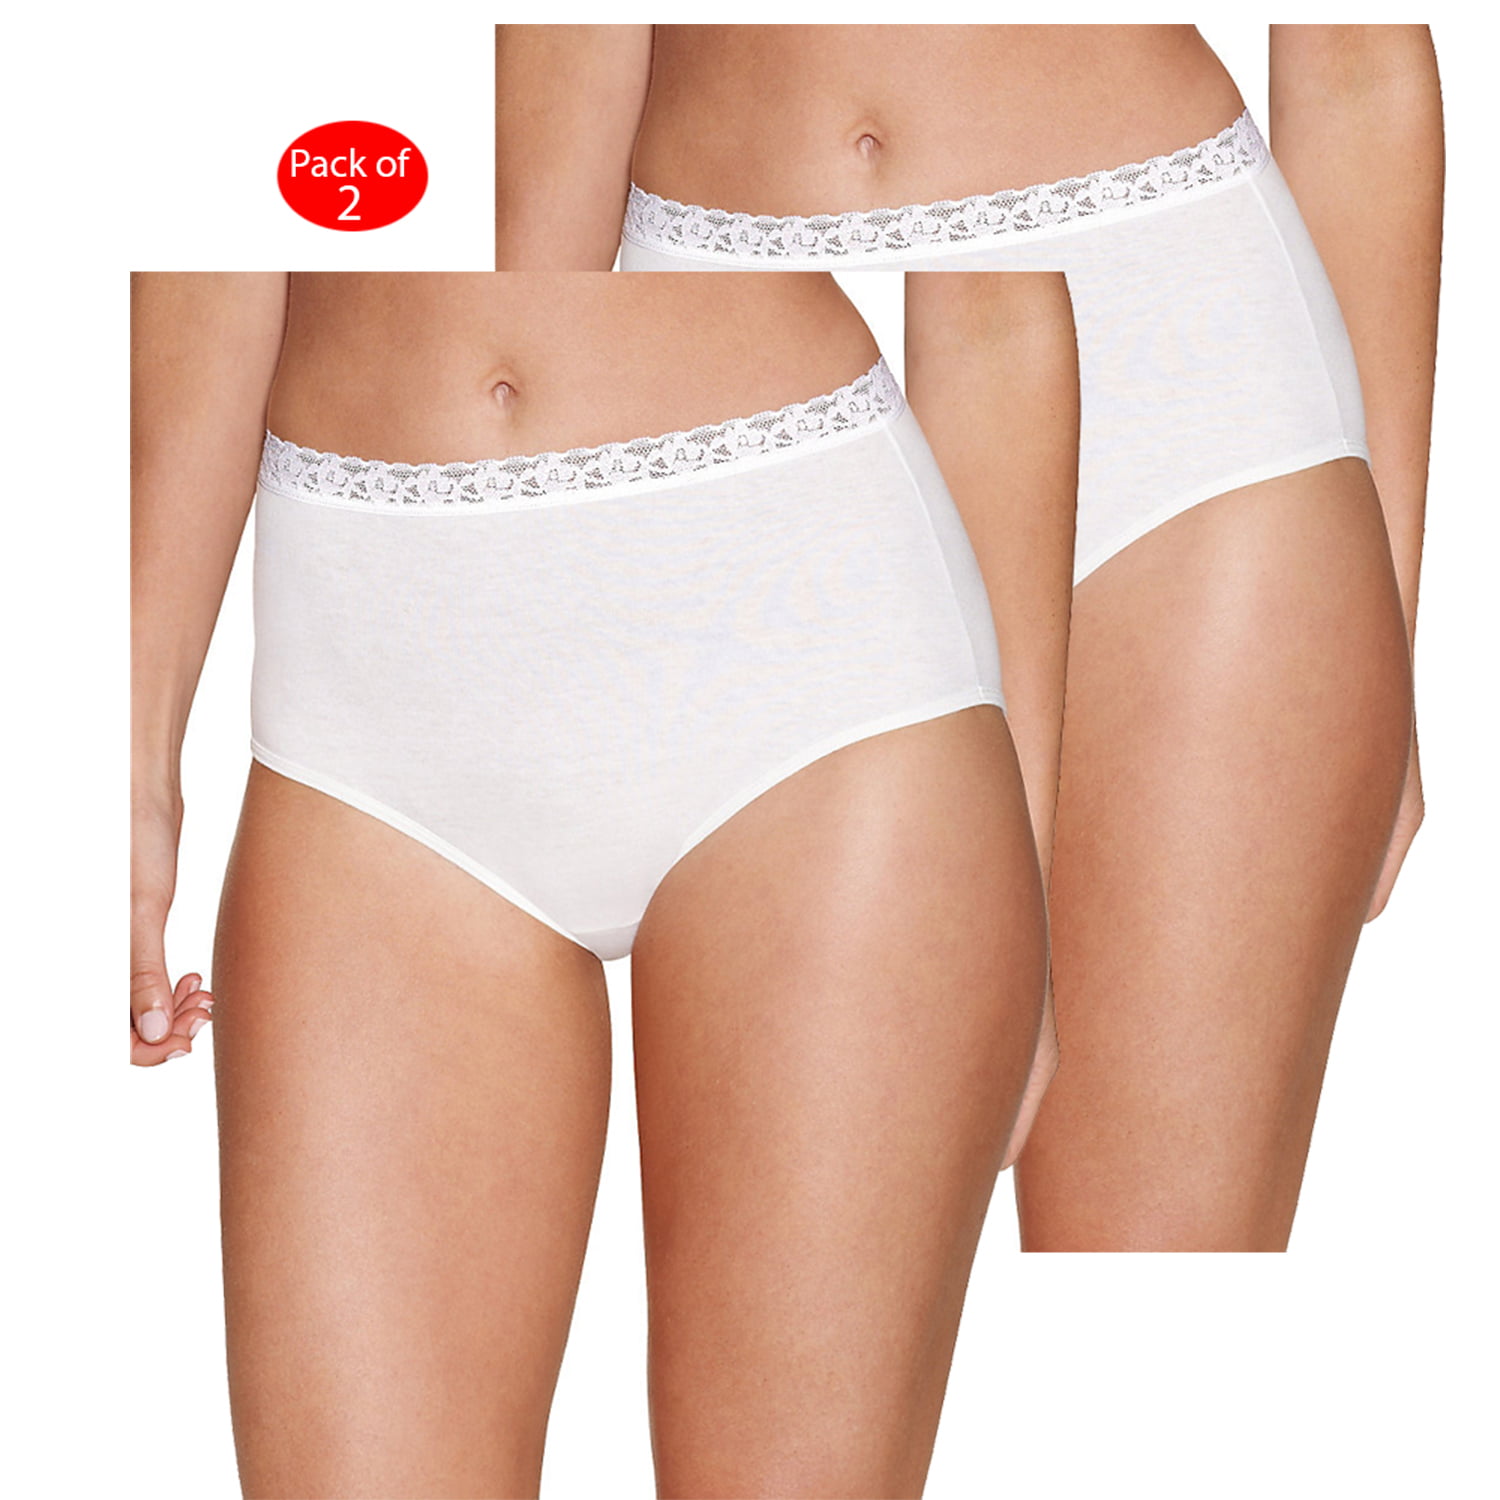 Hanes Hanes Women S Cotton No Ride Up Brief With Lace Pack Color